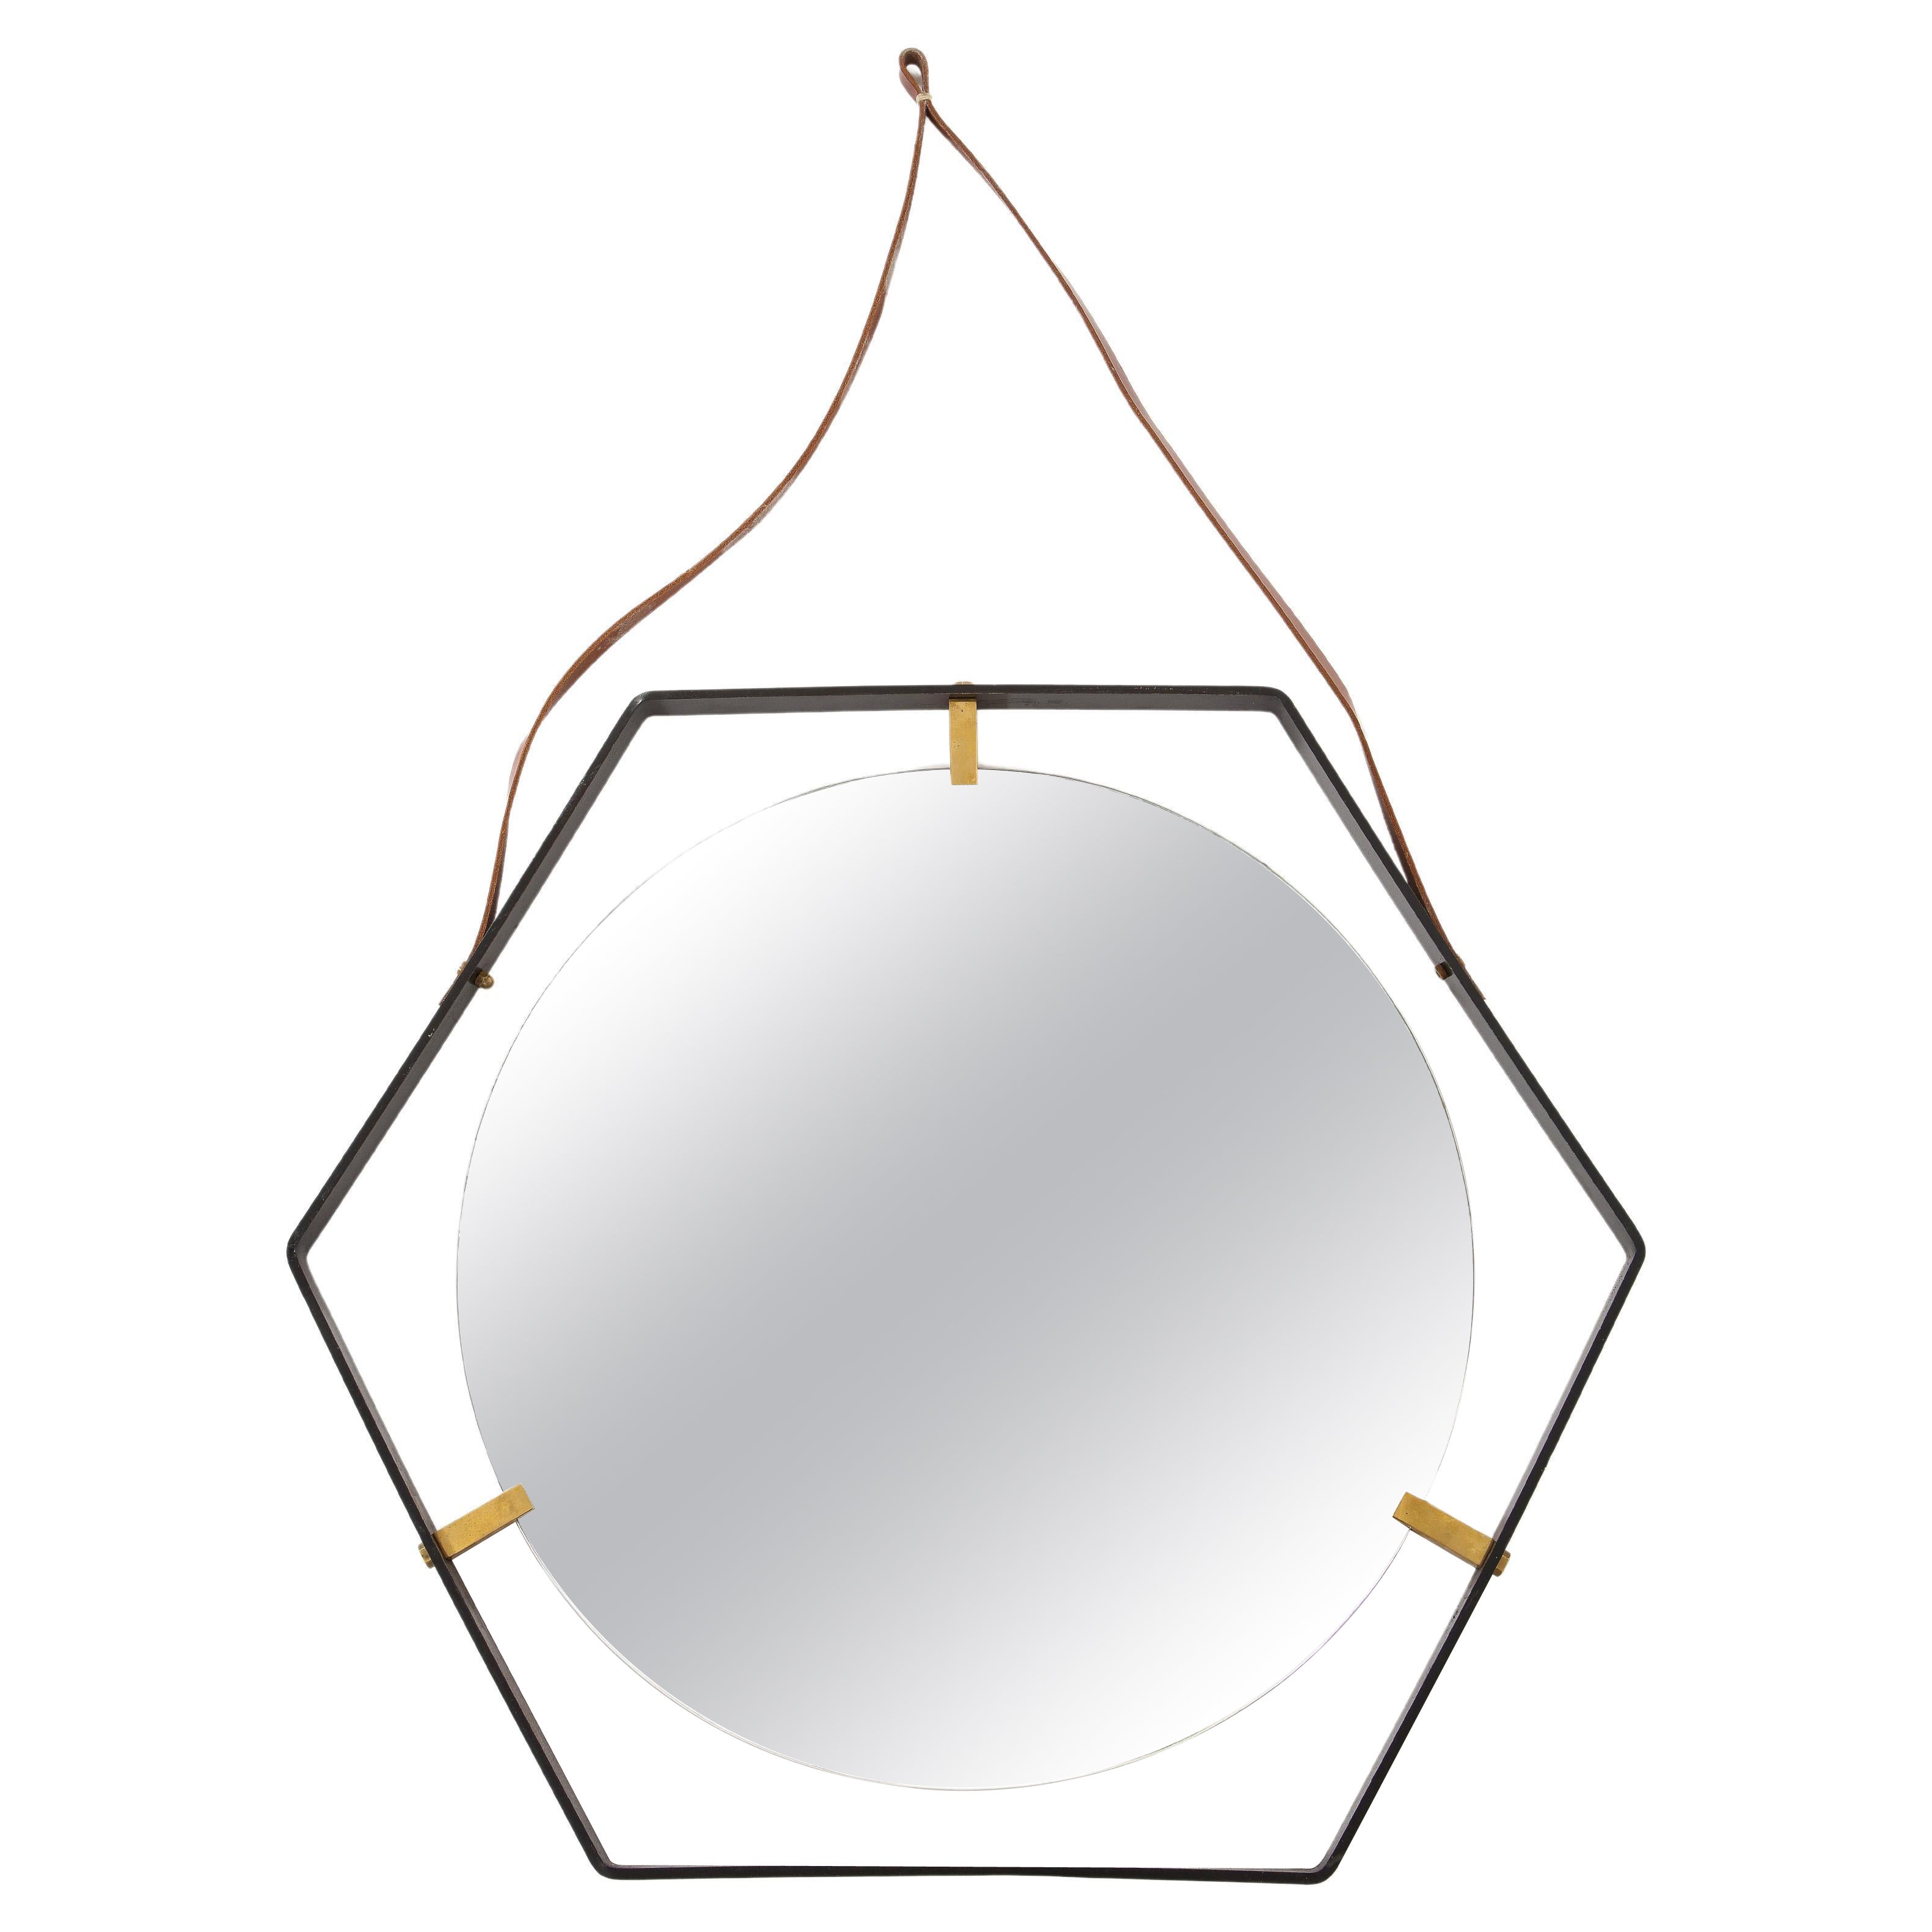 Octagonal Wrought Iron Mirror on Leather Strap, France 1960's For Sale